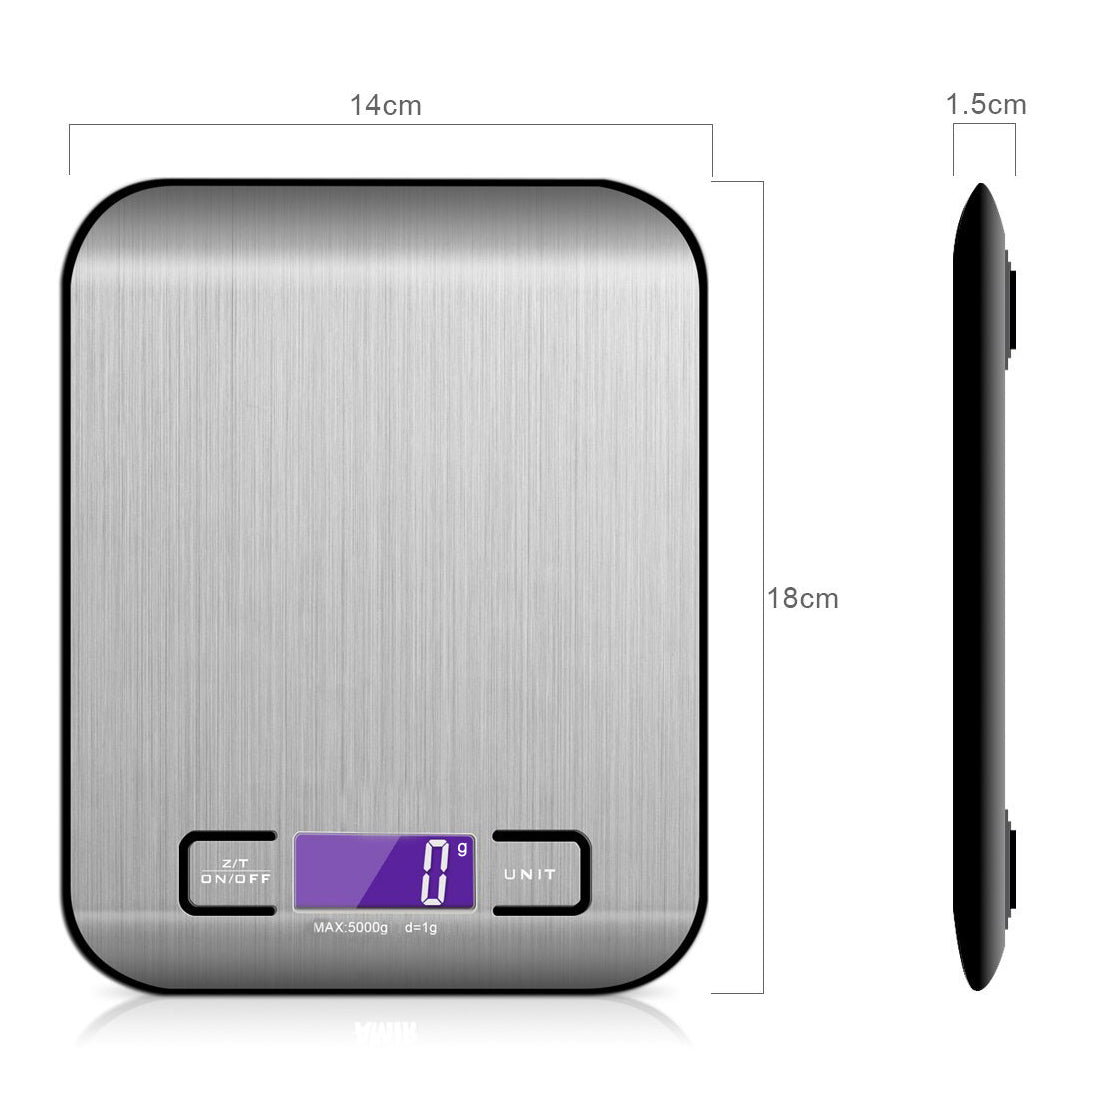 The Etekcity Food Scale is on sale at